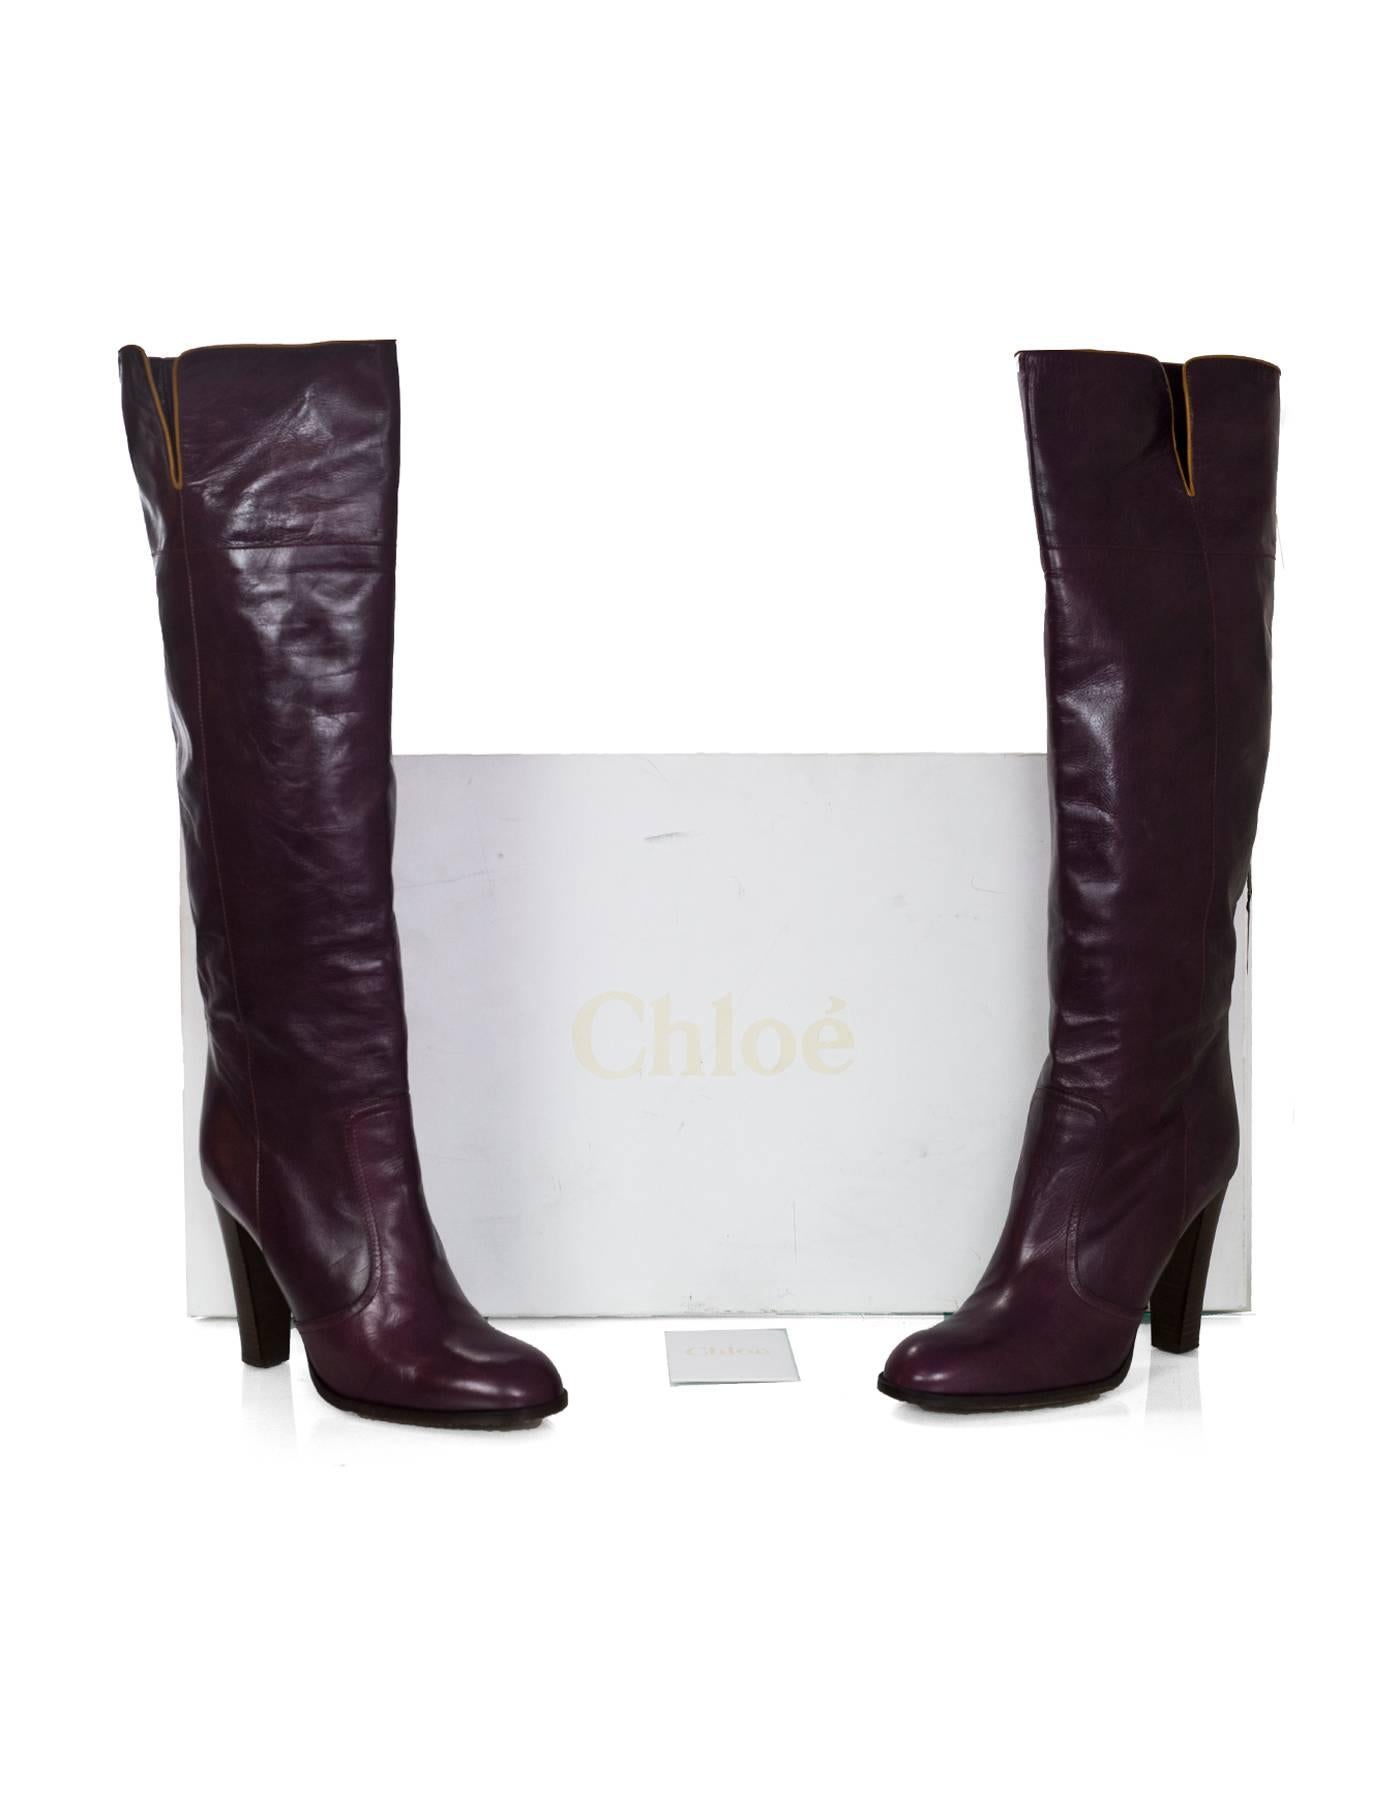 Chloe Plum Leather Knee High Boots Sz 40

Made In: Italy
Color: Plum
Materials: Leather
Closure/Opening: Pull on
Sole Stamp: Chloe 40 made in italy
Overall Condition: Excellent pre-owned condition with the exception of very light wear at